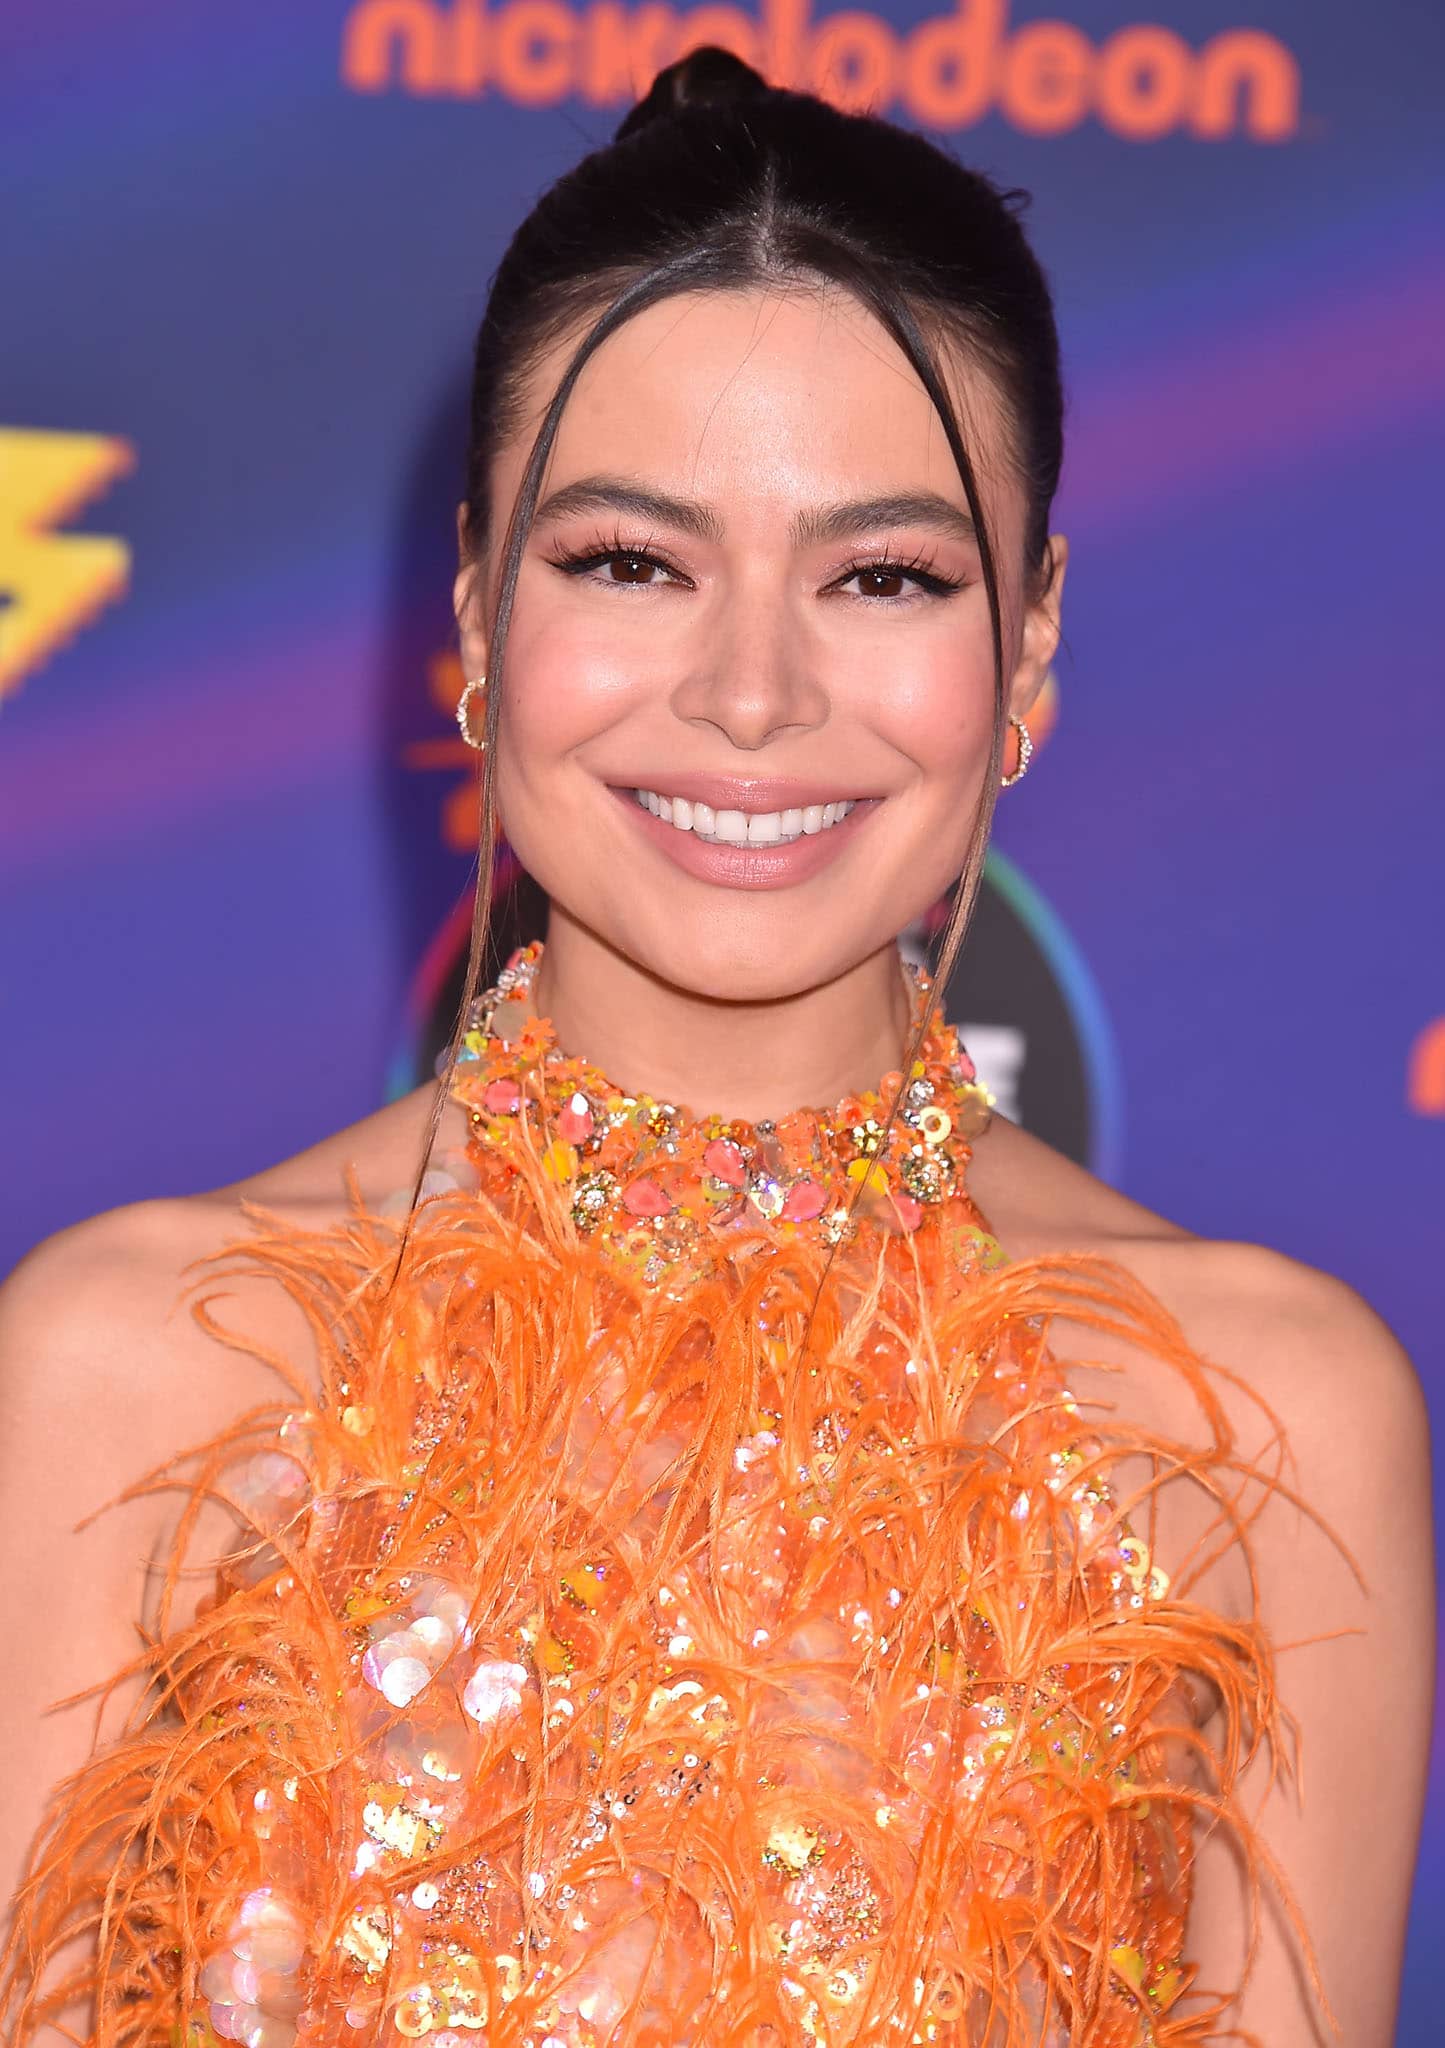 Miranda Cosgrove styles her tresses in a chic updo and wears nude makeup with fake lashes